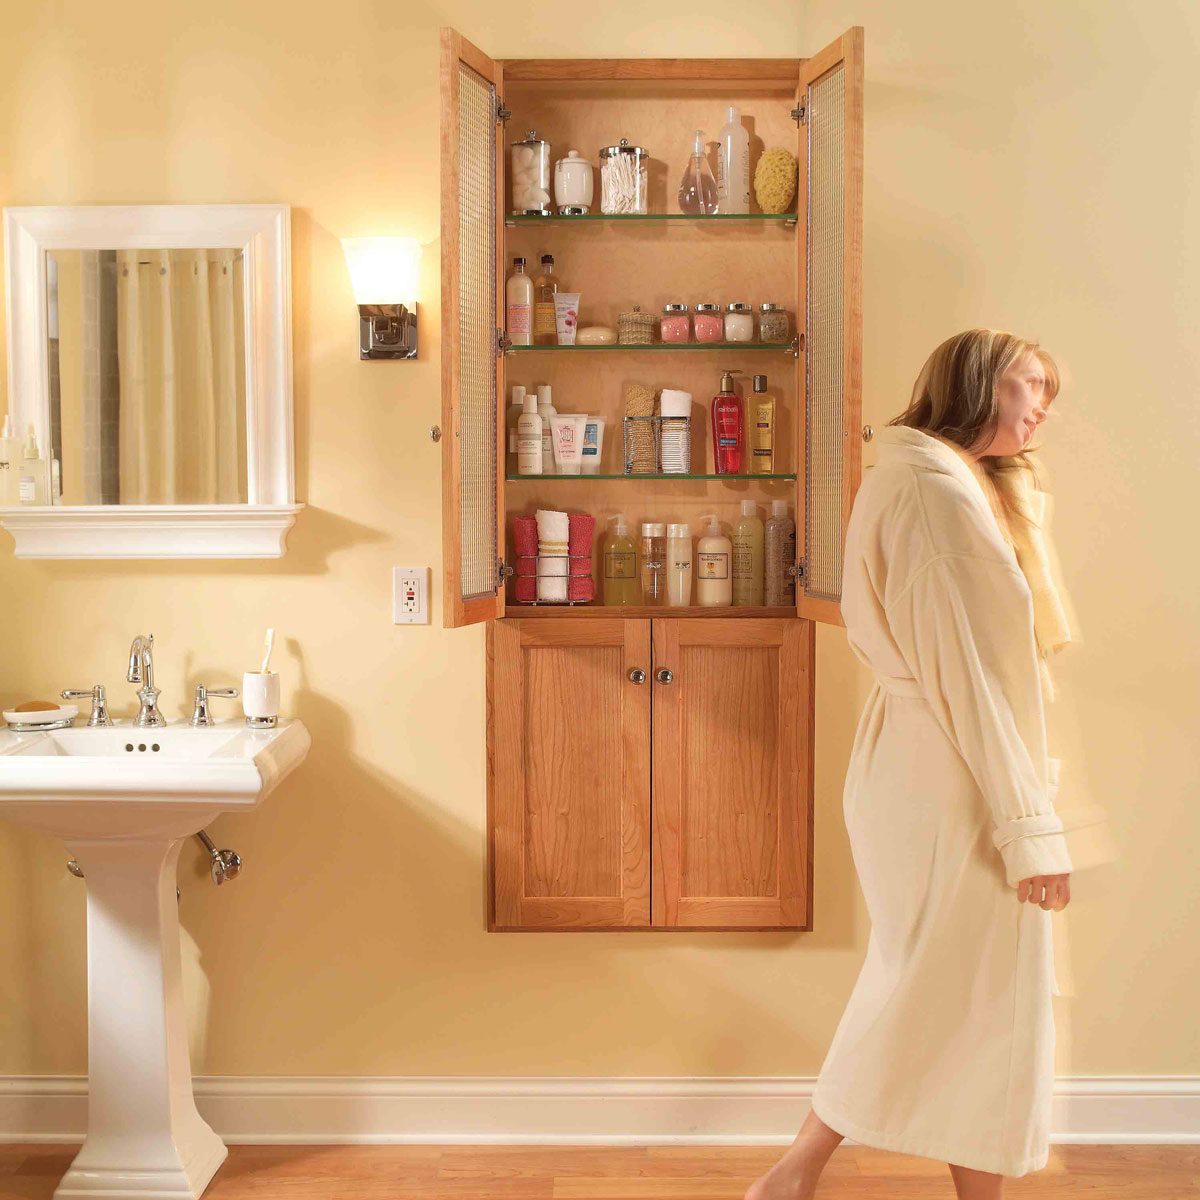 Best Bathroom Storage Cabinets to Buy in 2023